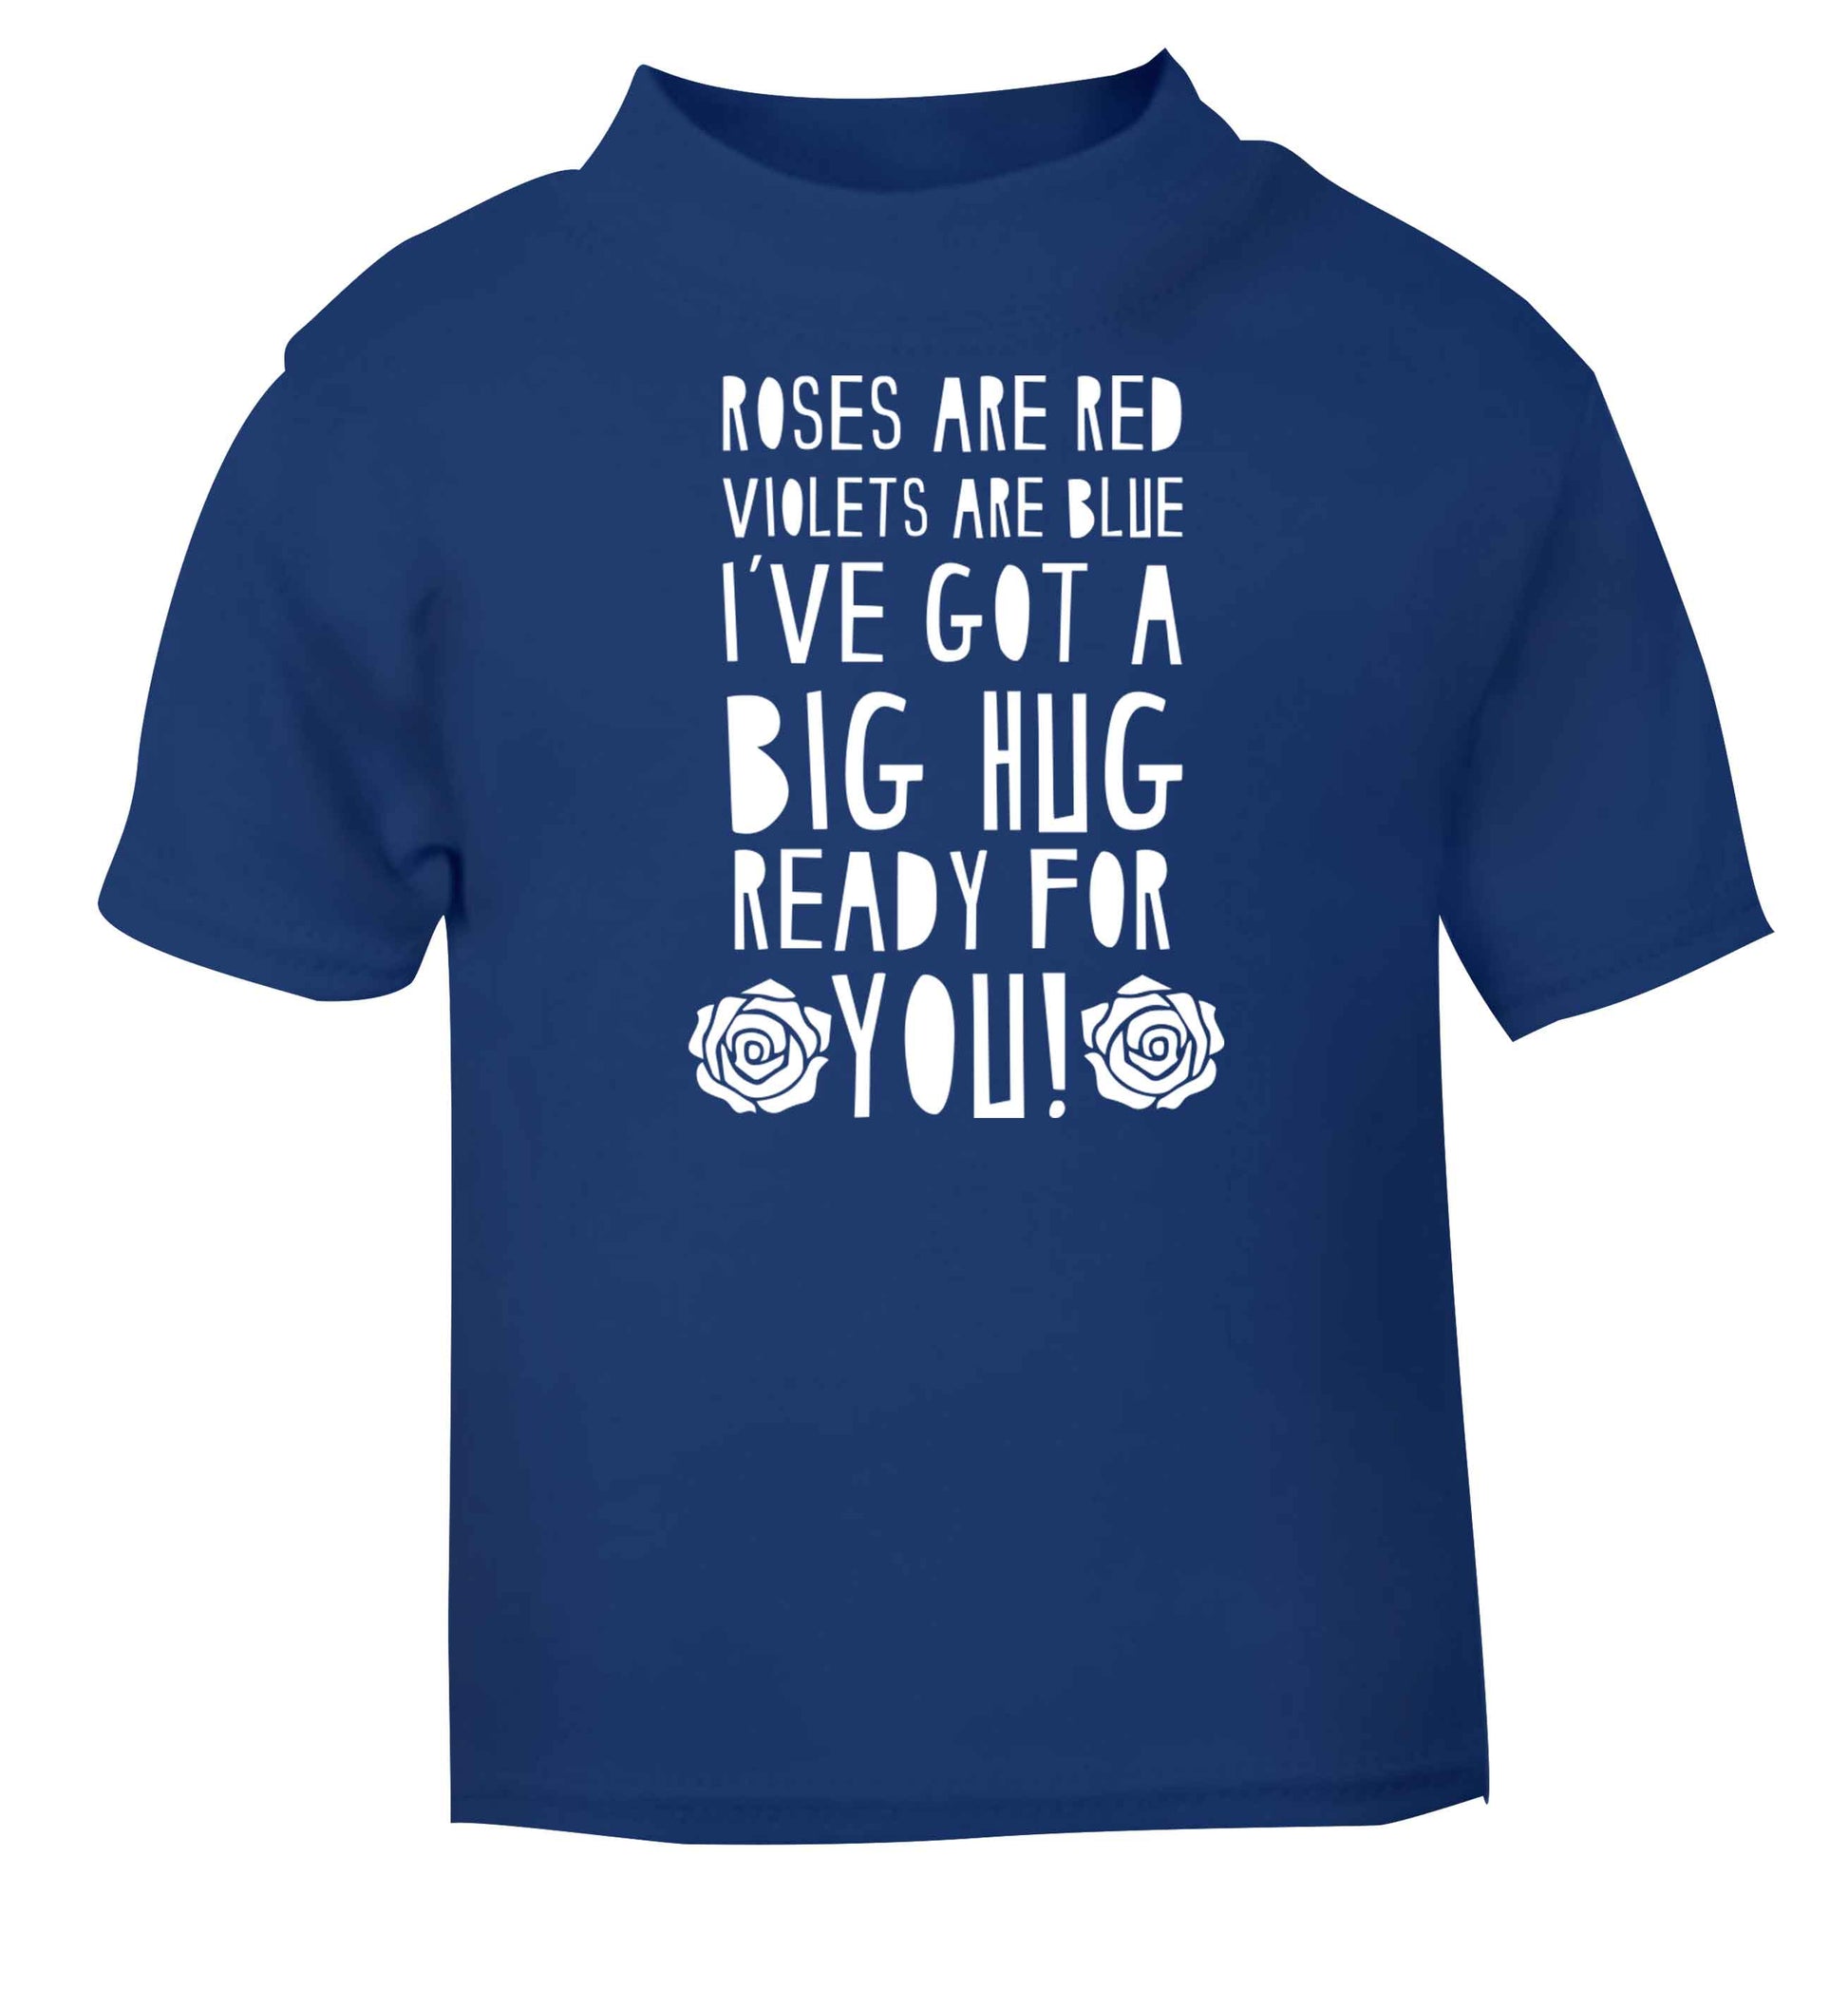 Roses are red violets are blue I've got a big hug coming for you blue baby toddler Tshirt 2 Years